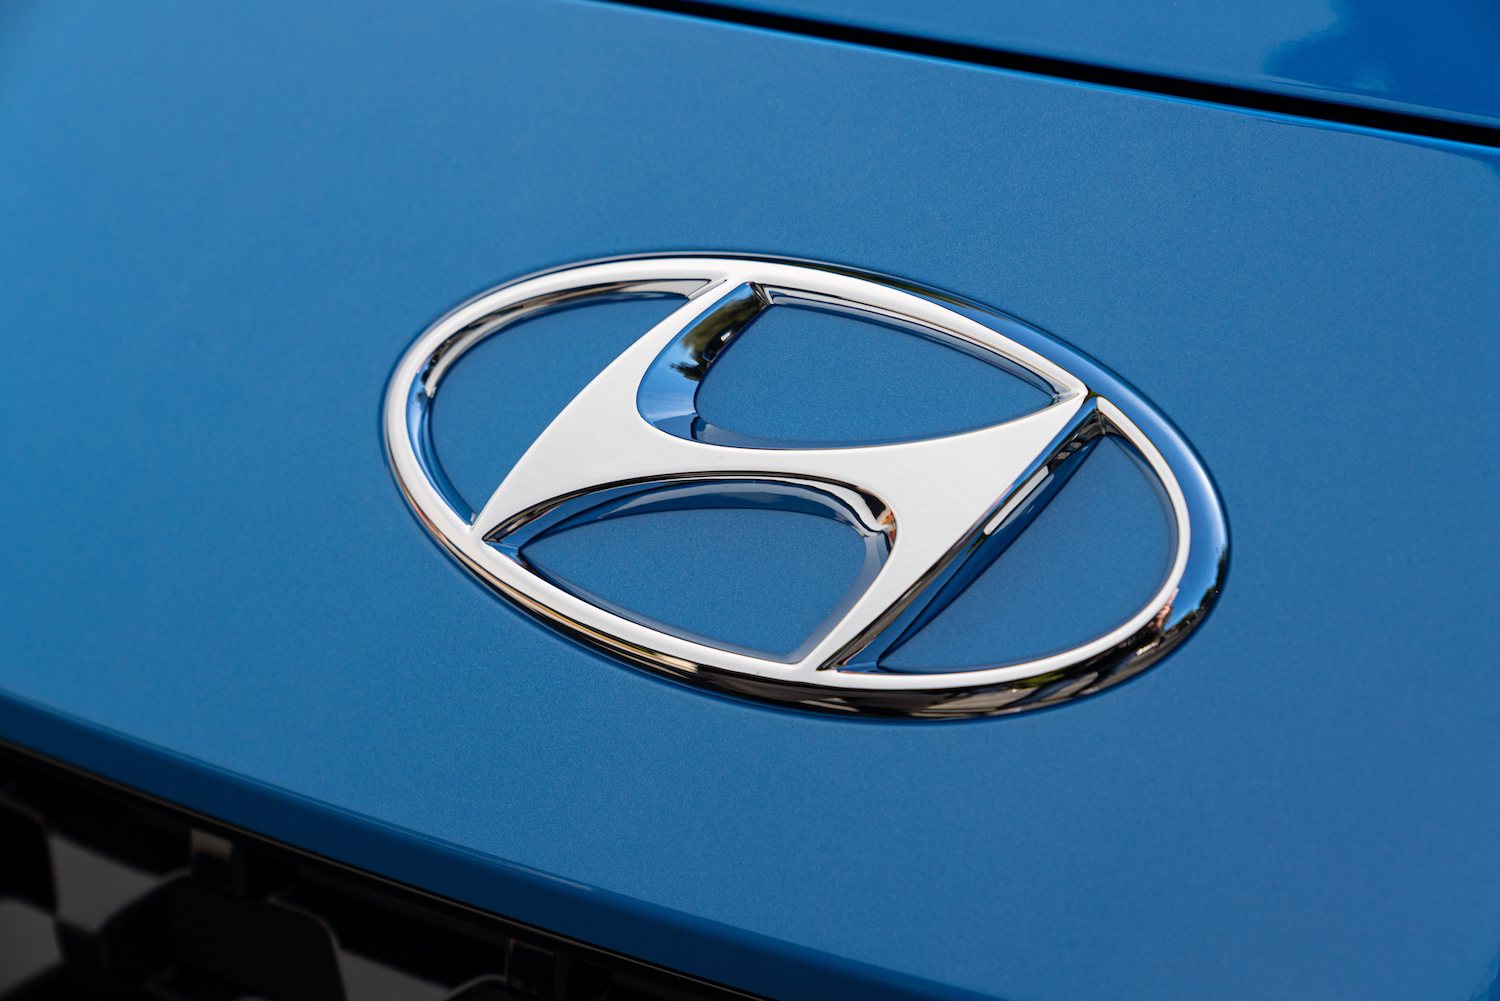 Hyundai Finance Company Must Pay $19 Million For Credit Reporting Inaccuracies